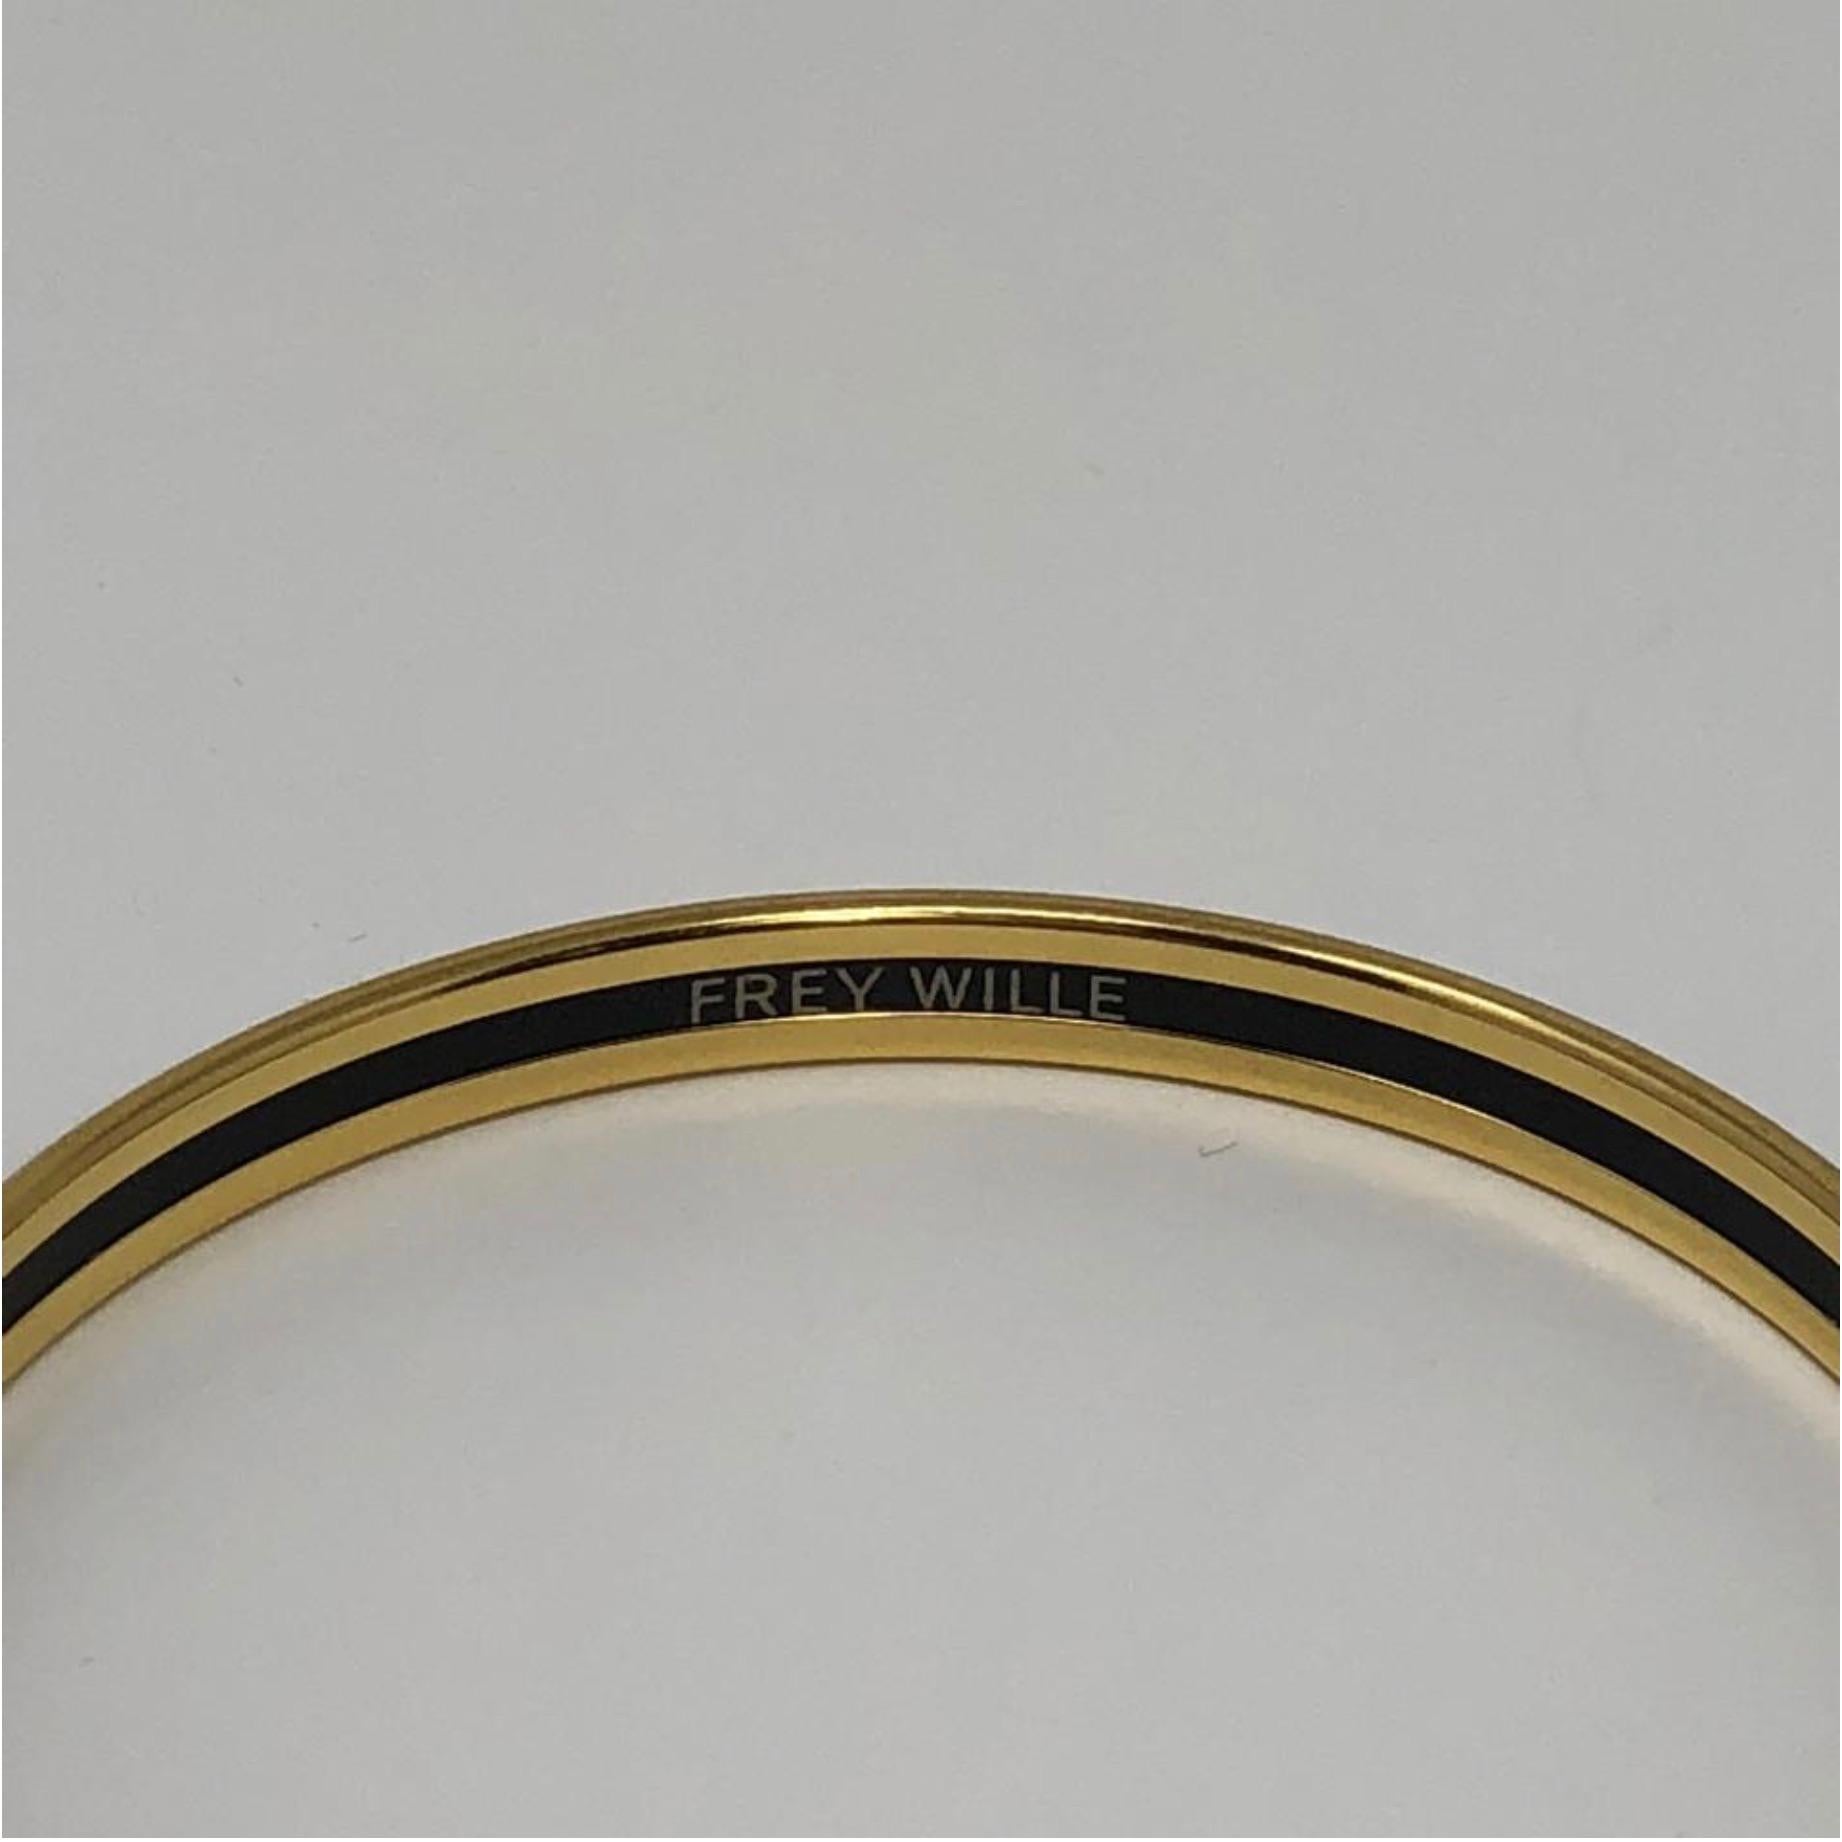 MODEL - Frey Wille 14k Yellow Gold Bordered Bangle Ulta Magic Sphinx Bangle

CONDITION - Exceptional! No signs of wear.

SKU - 2208-FL

ORIGINAL RETAIL PRICE - 515 + tax

MATERIAL - Gold and Enamel

WEIGHT - NA

DIMENSIONS - 2.5 inch Diameter, .25